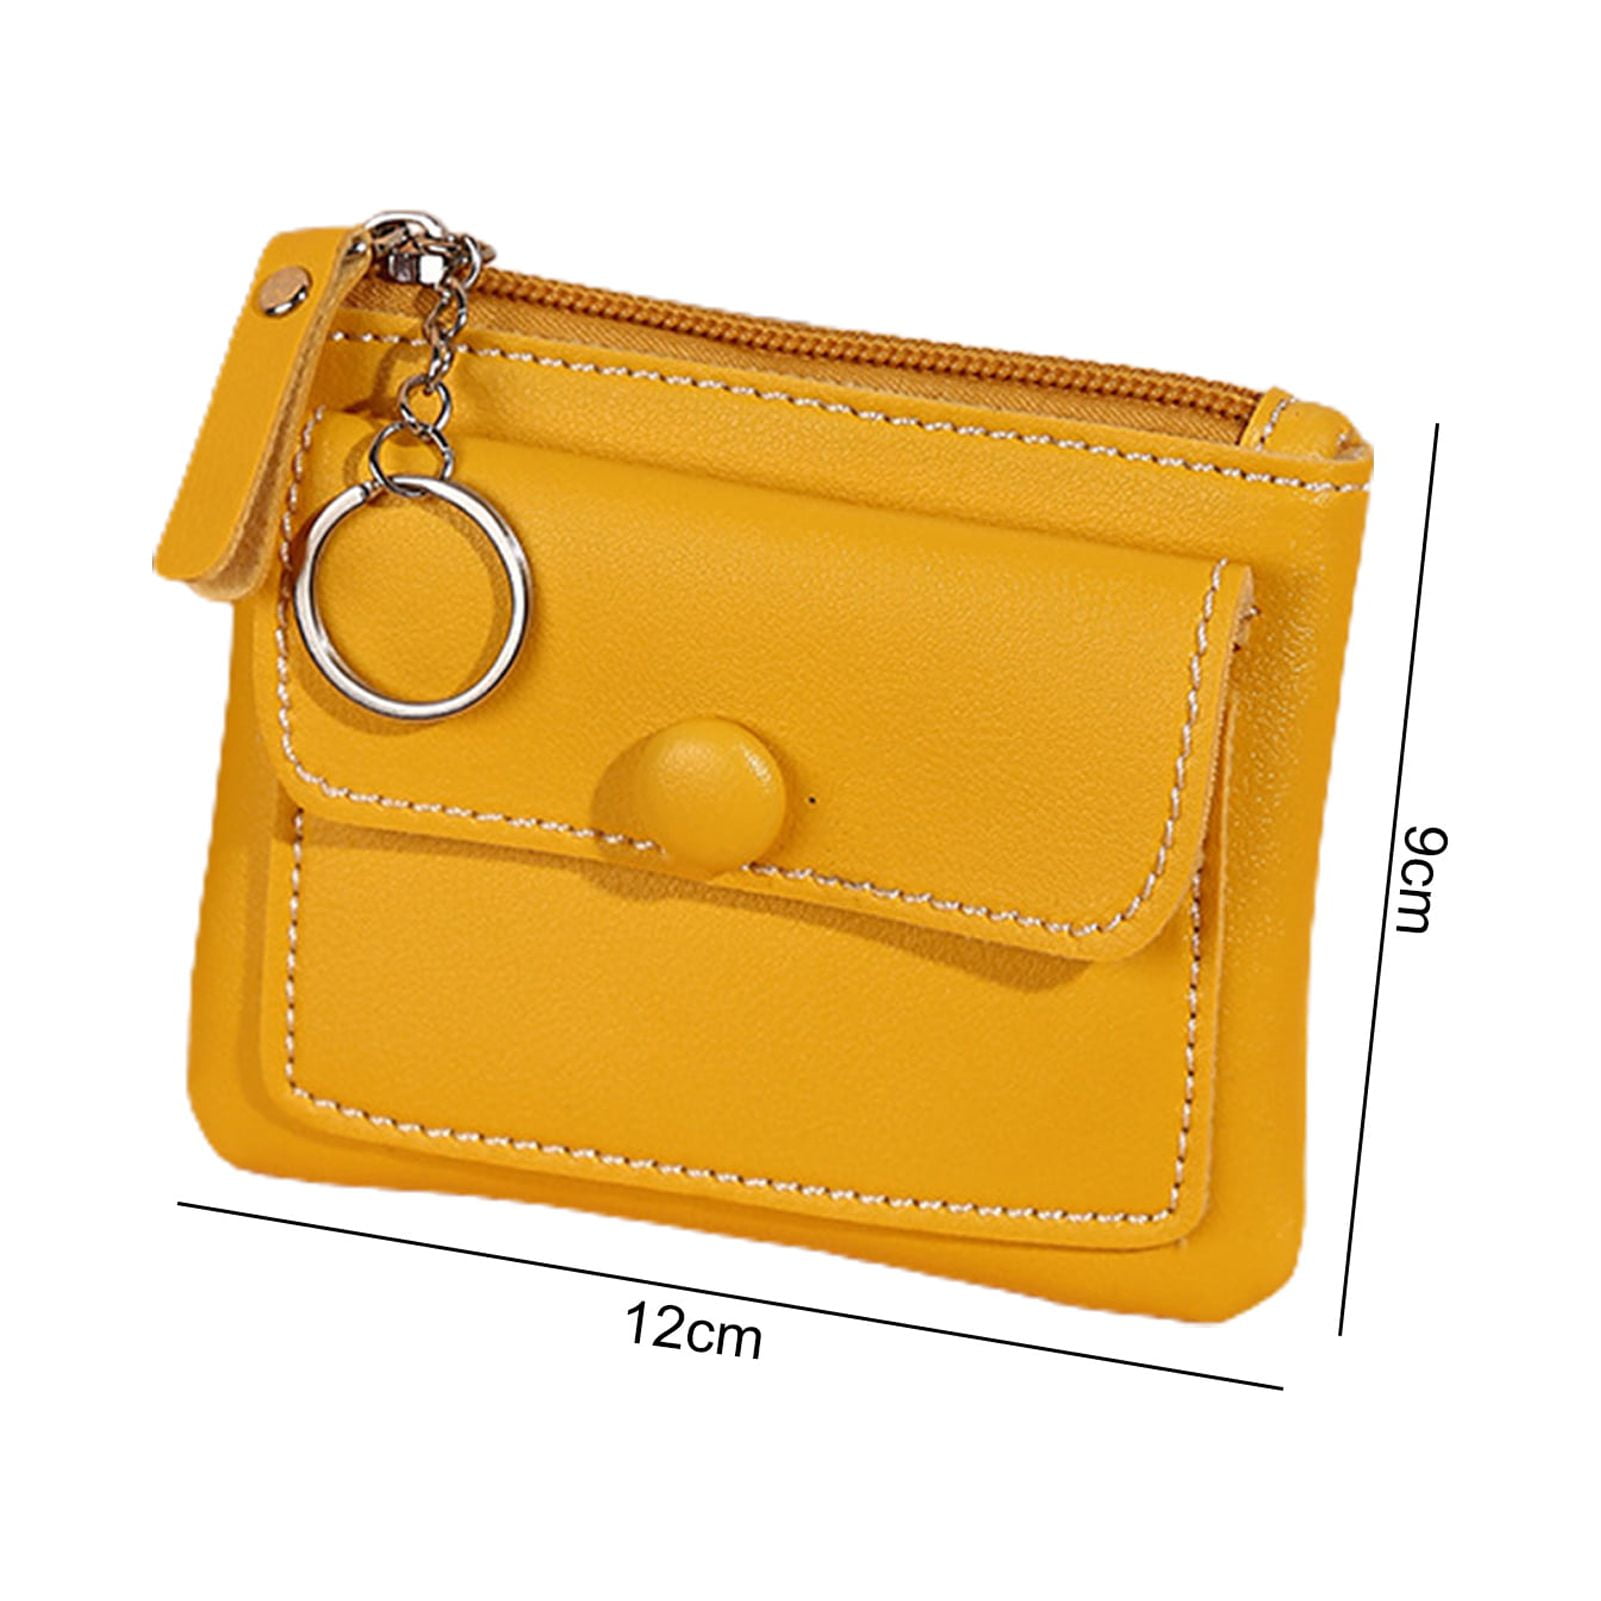 Yesbay Coin Purse Short Two Pockets Large Capacity Zipper Closure Coins  Storage Faux Leather Women Small Money Bag Bank Card Holder for Outdoor